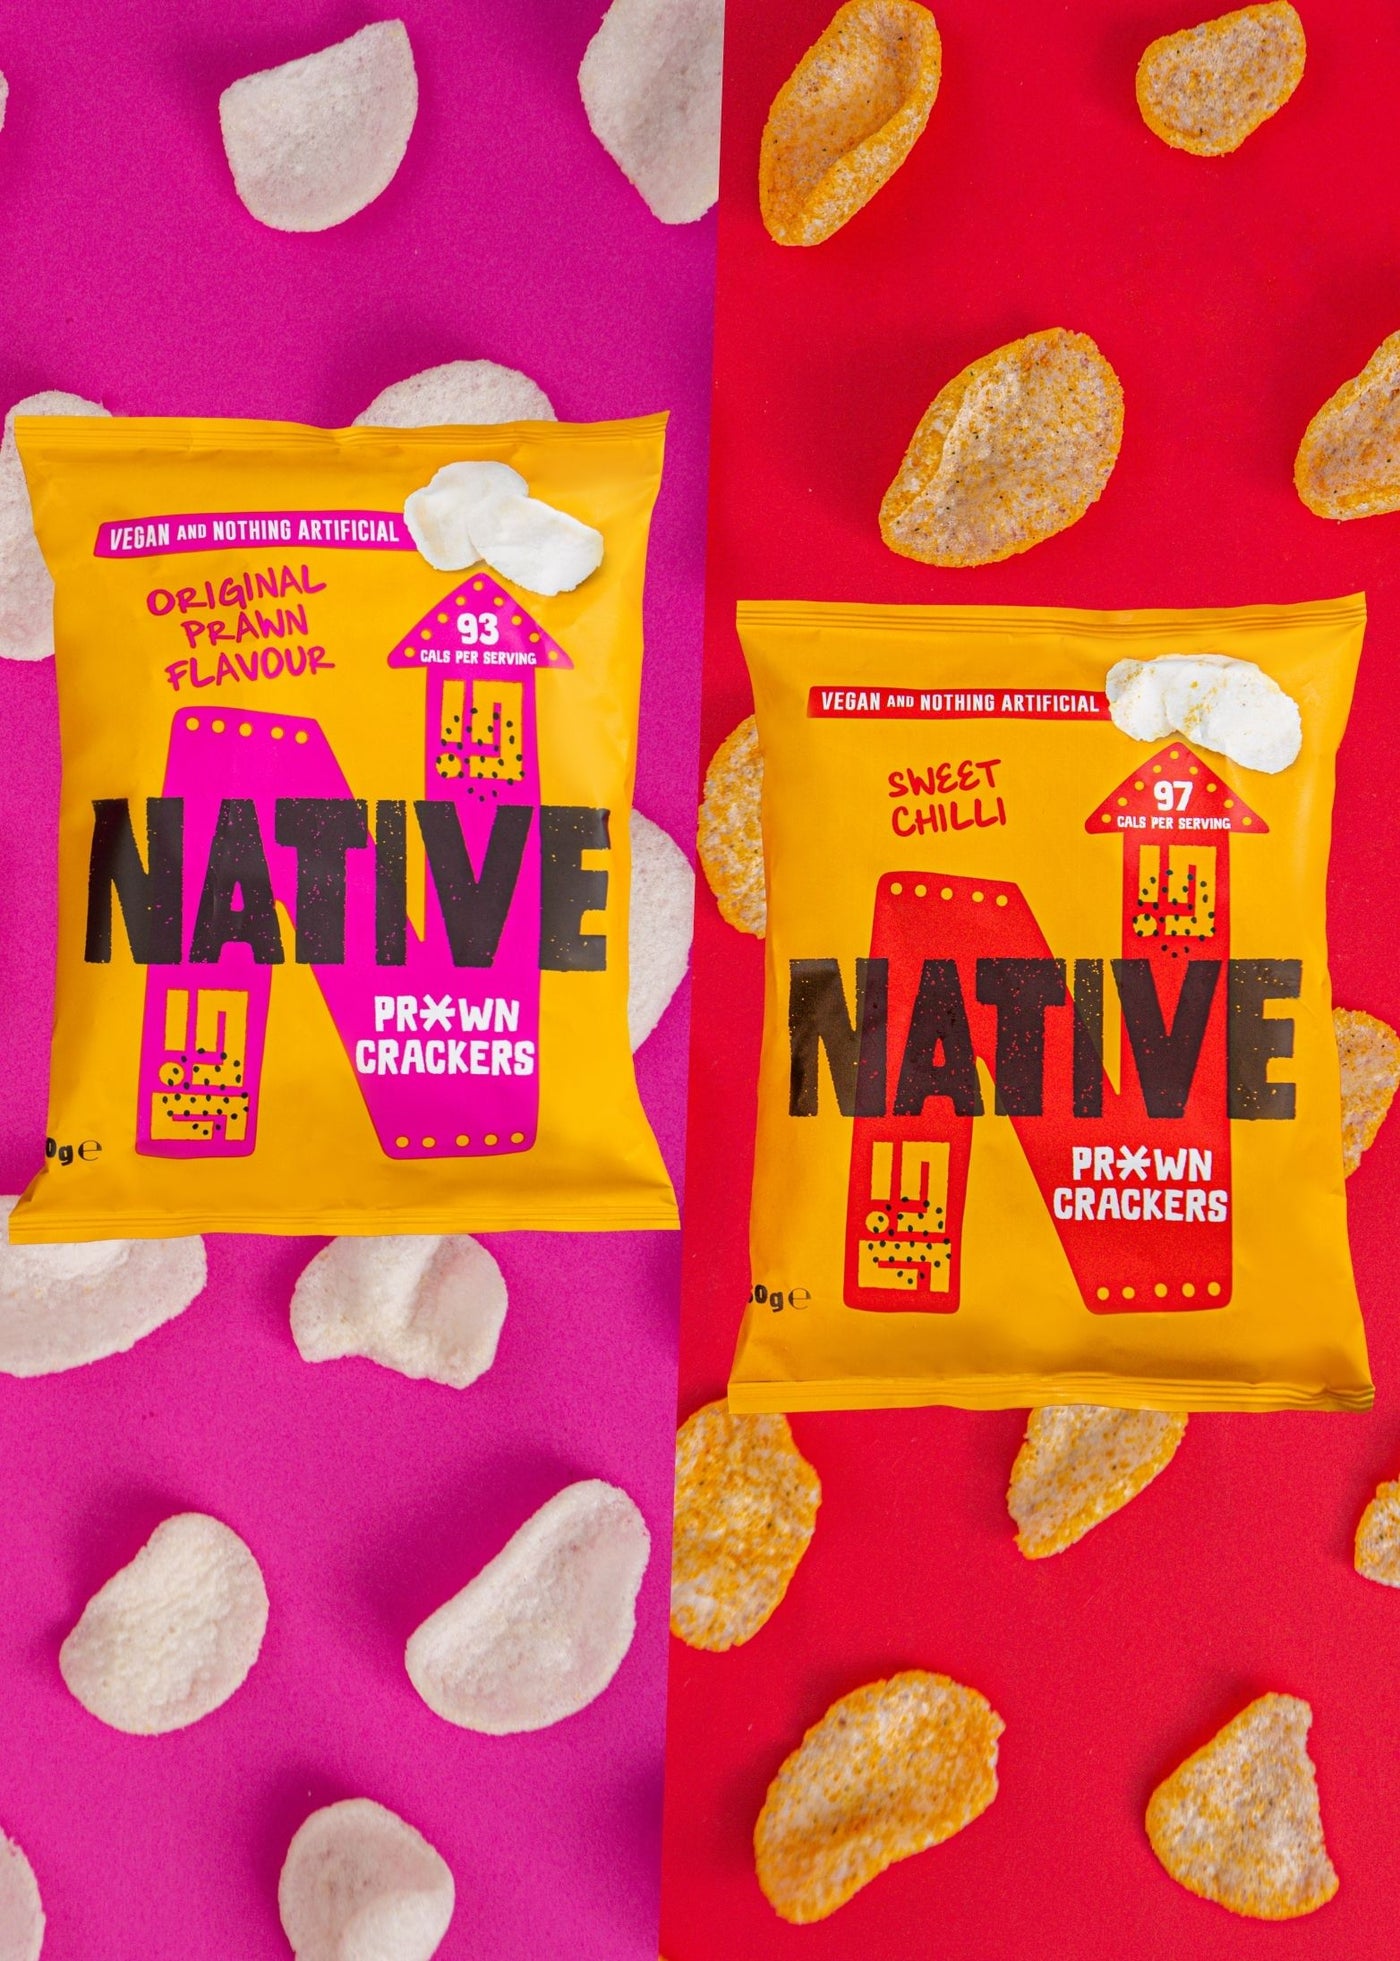 Vegan prawn crackers in original prawn flavour and sweet chilli. A light and crunchy snack for dinner or lunch. Vegan, vegetarian, gluten free, under 99 calories, less fat than crisps and natural. Enjoy with a meal, dip or takeaway. Free delivery over £20